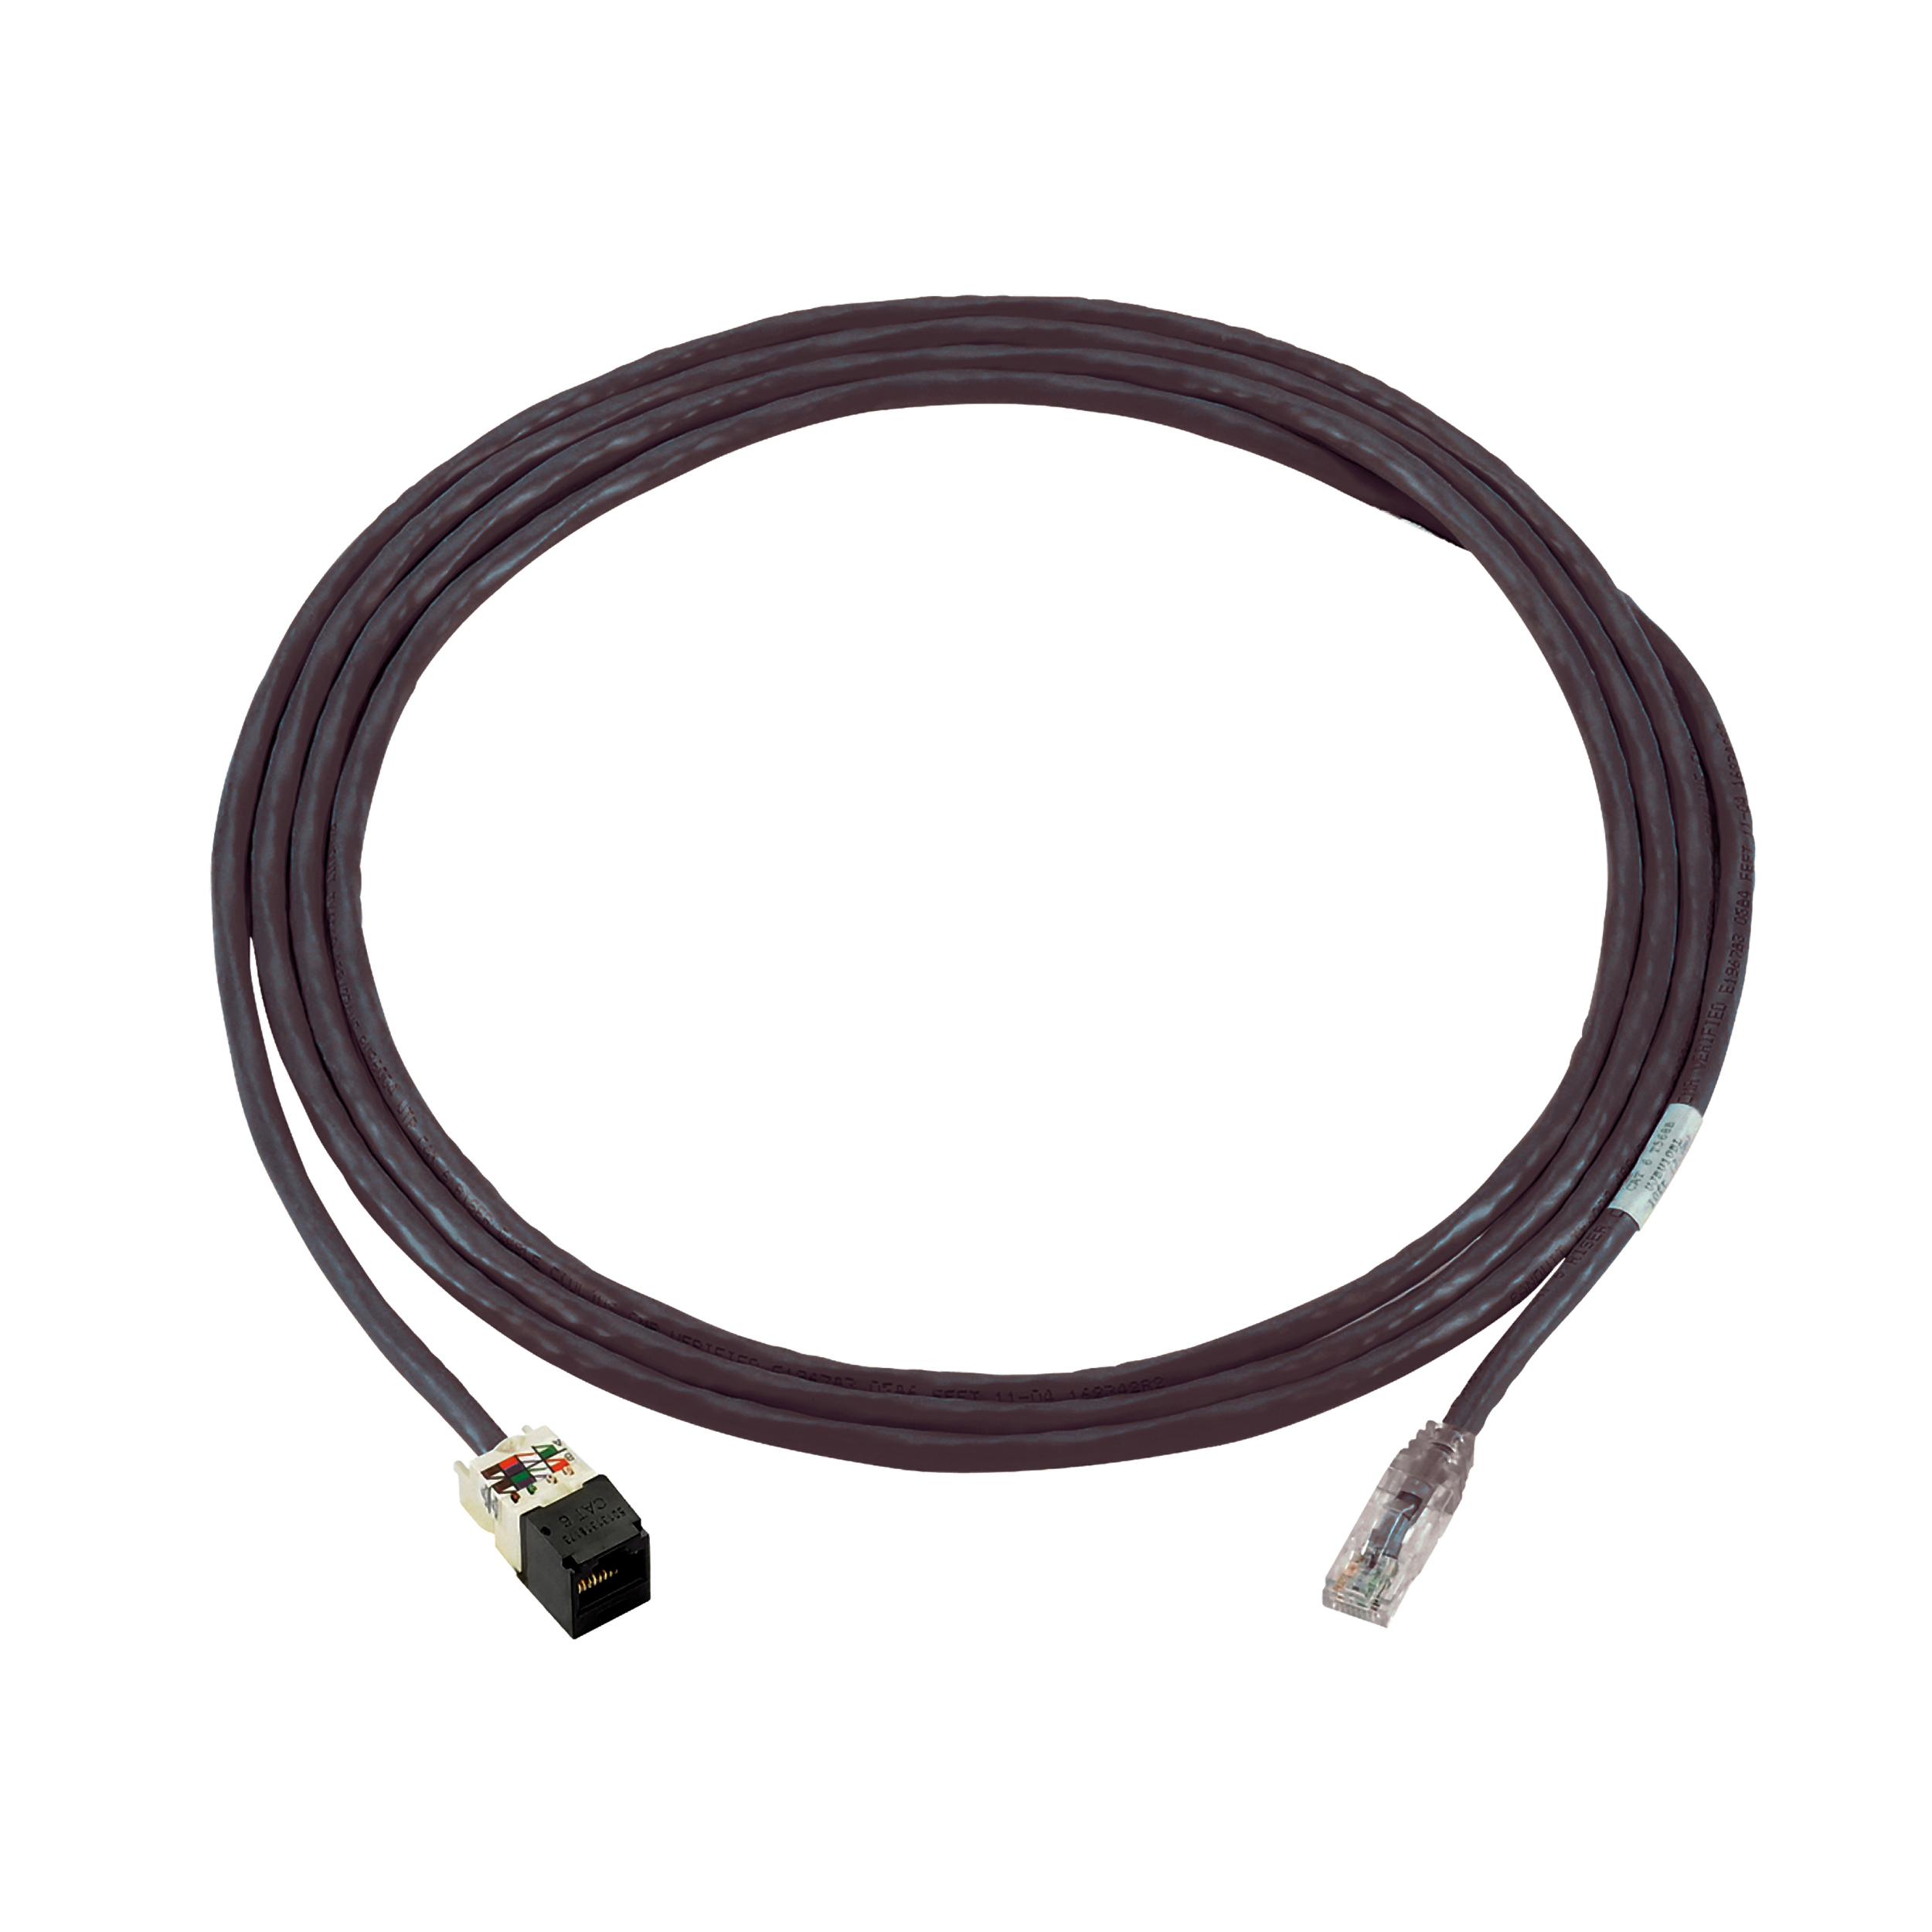 Smart Rack Security Patch Cord (RJ45 FEMALE TO RJ45 MALE)